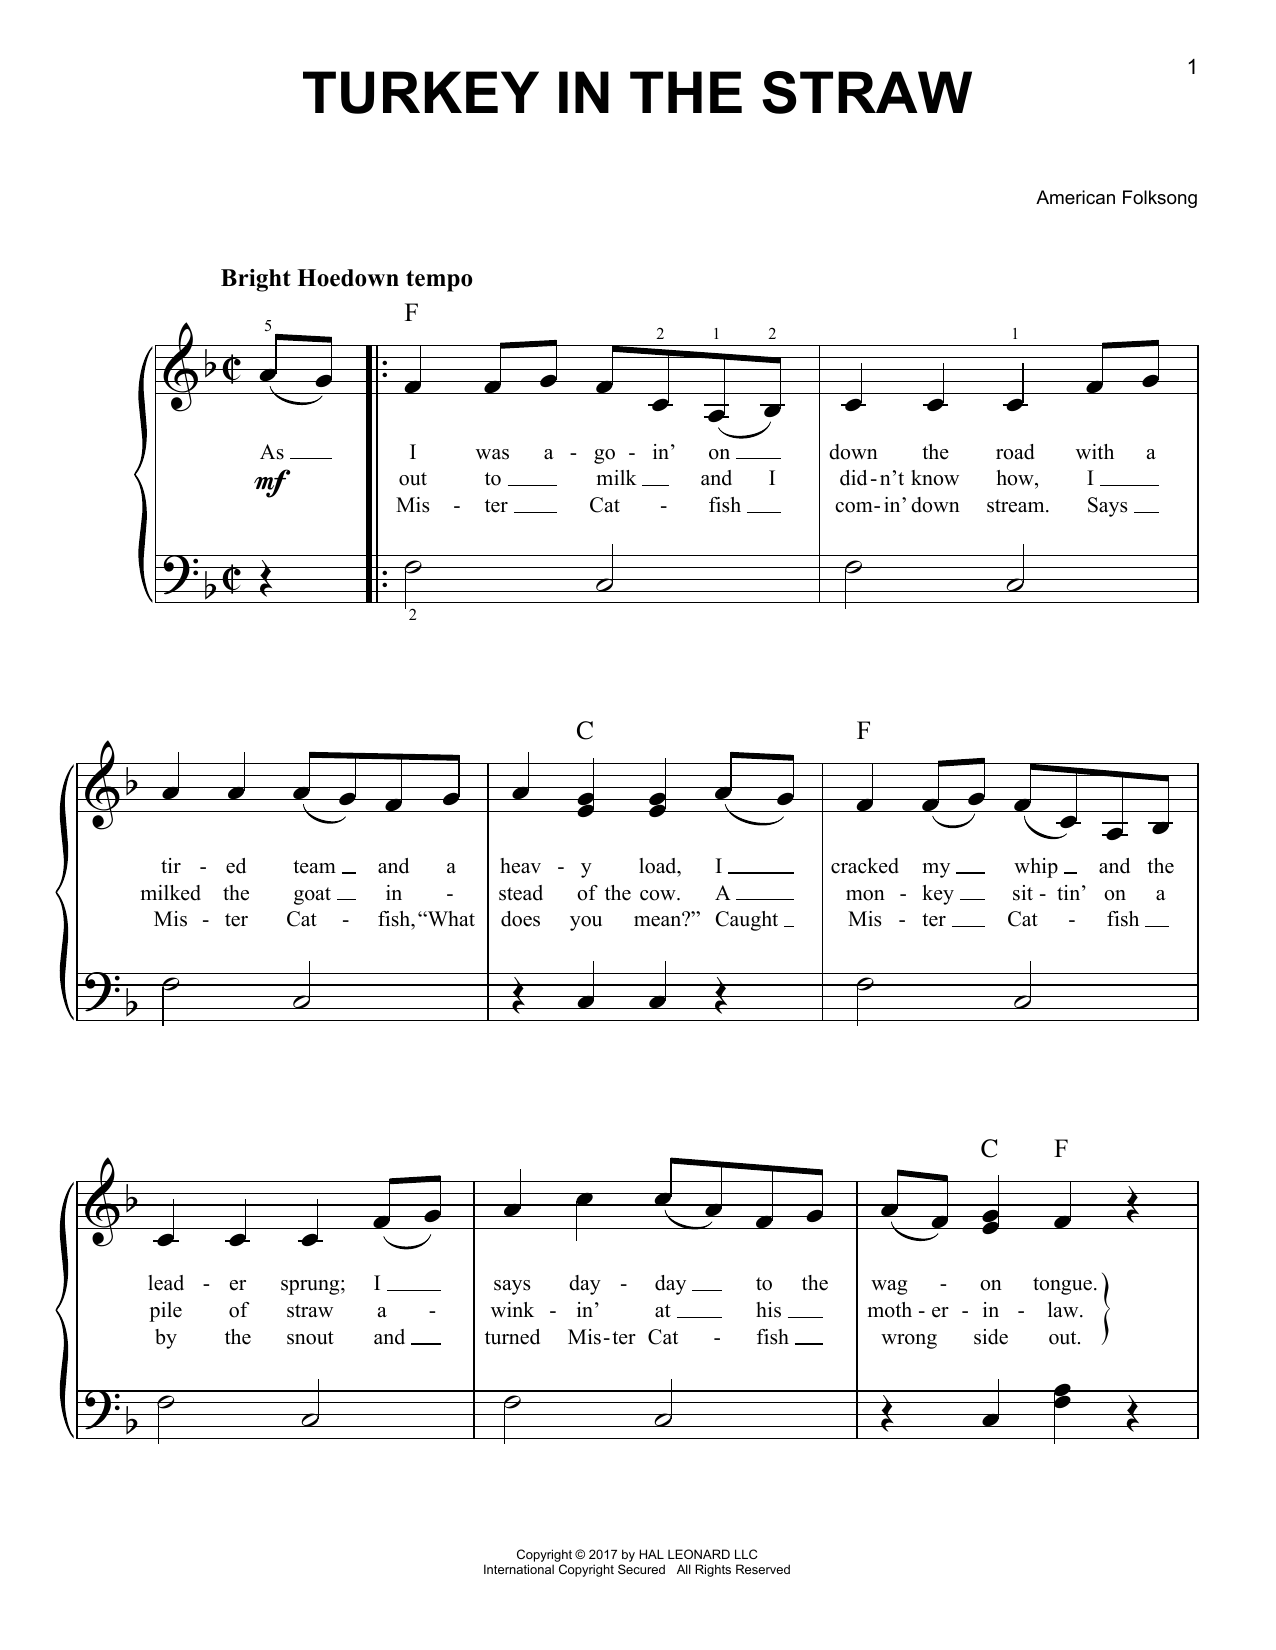 Download American Folksong Turkey In The Straw Sheet Music